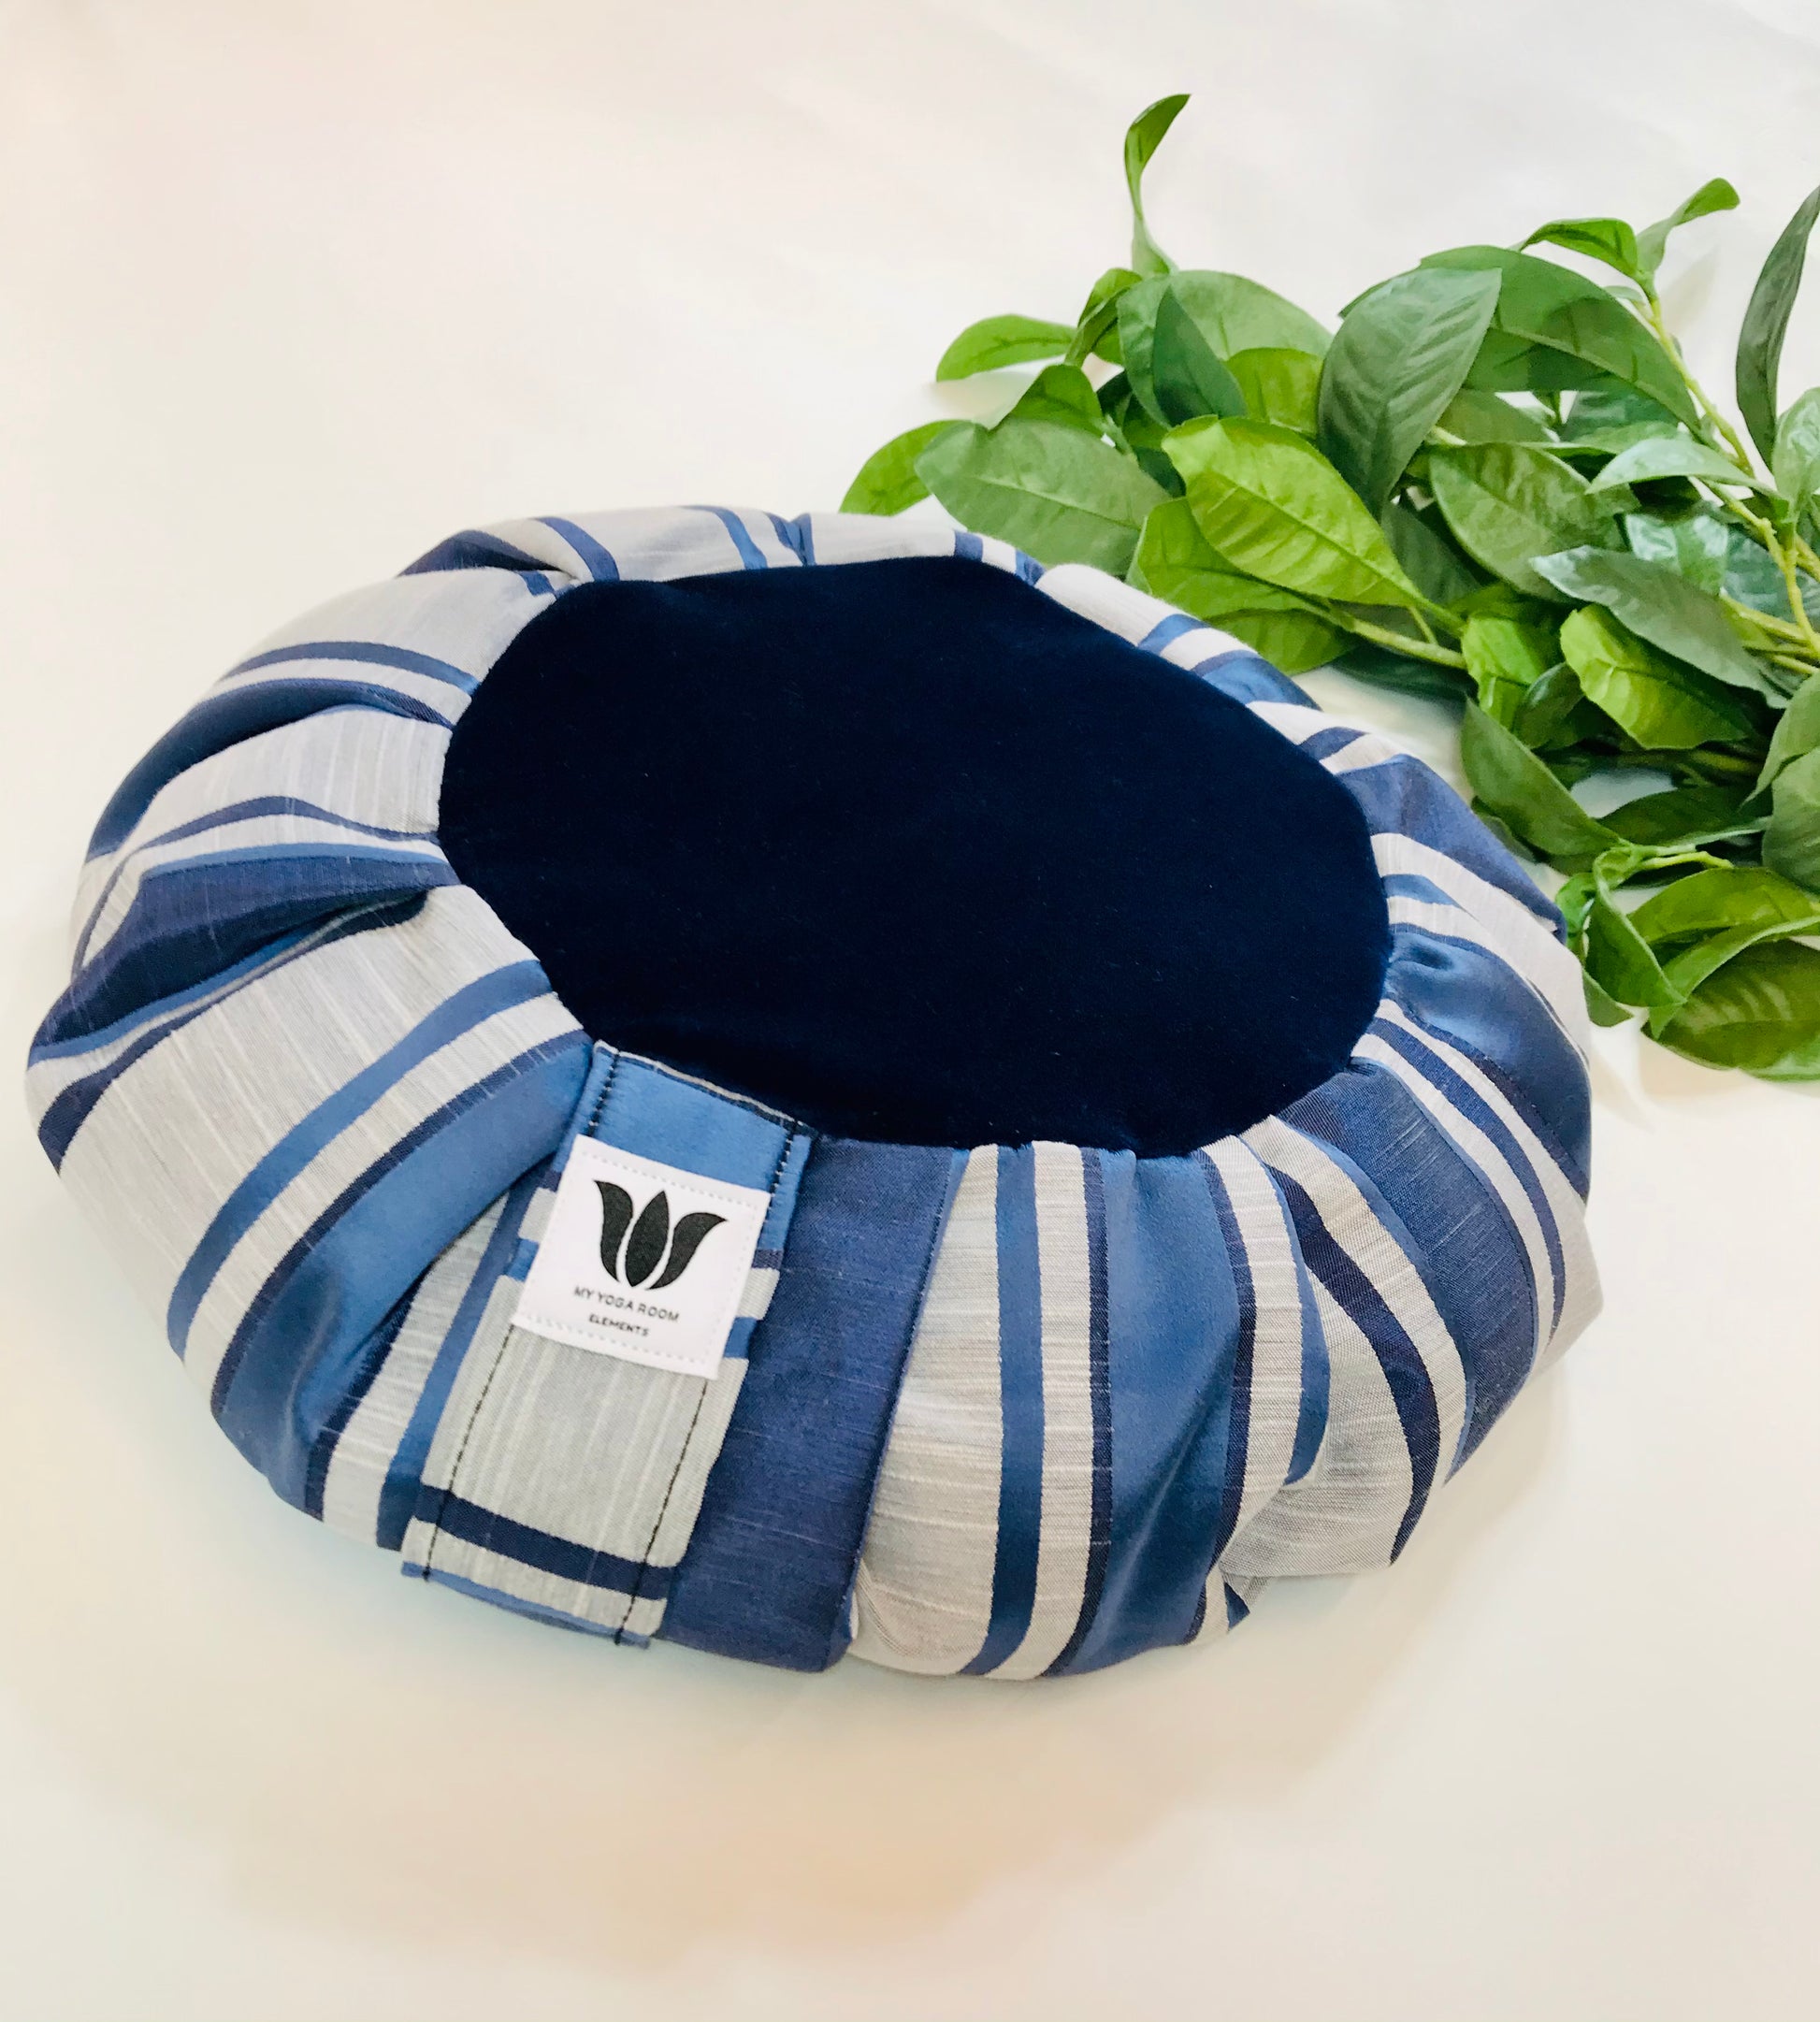 Handcrafted premium satin and linen textured meditation seat cushion in navy blue and and light grey strip with plush dark blue center in solid print. Align the spine and body in comfort to calm the monkey mind in your meditation practice. Handcrafted in Calgary, Alberta Canada